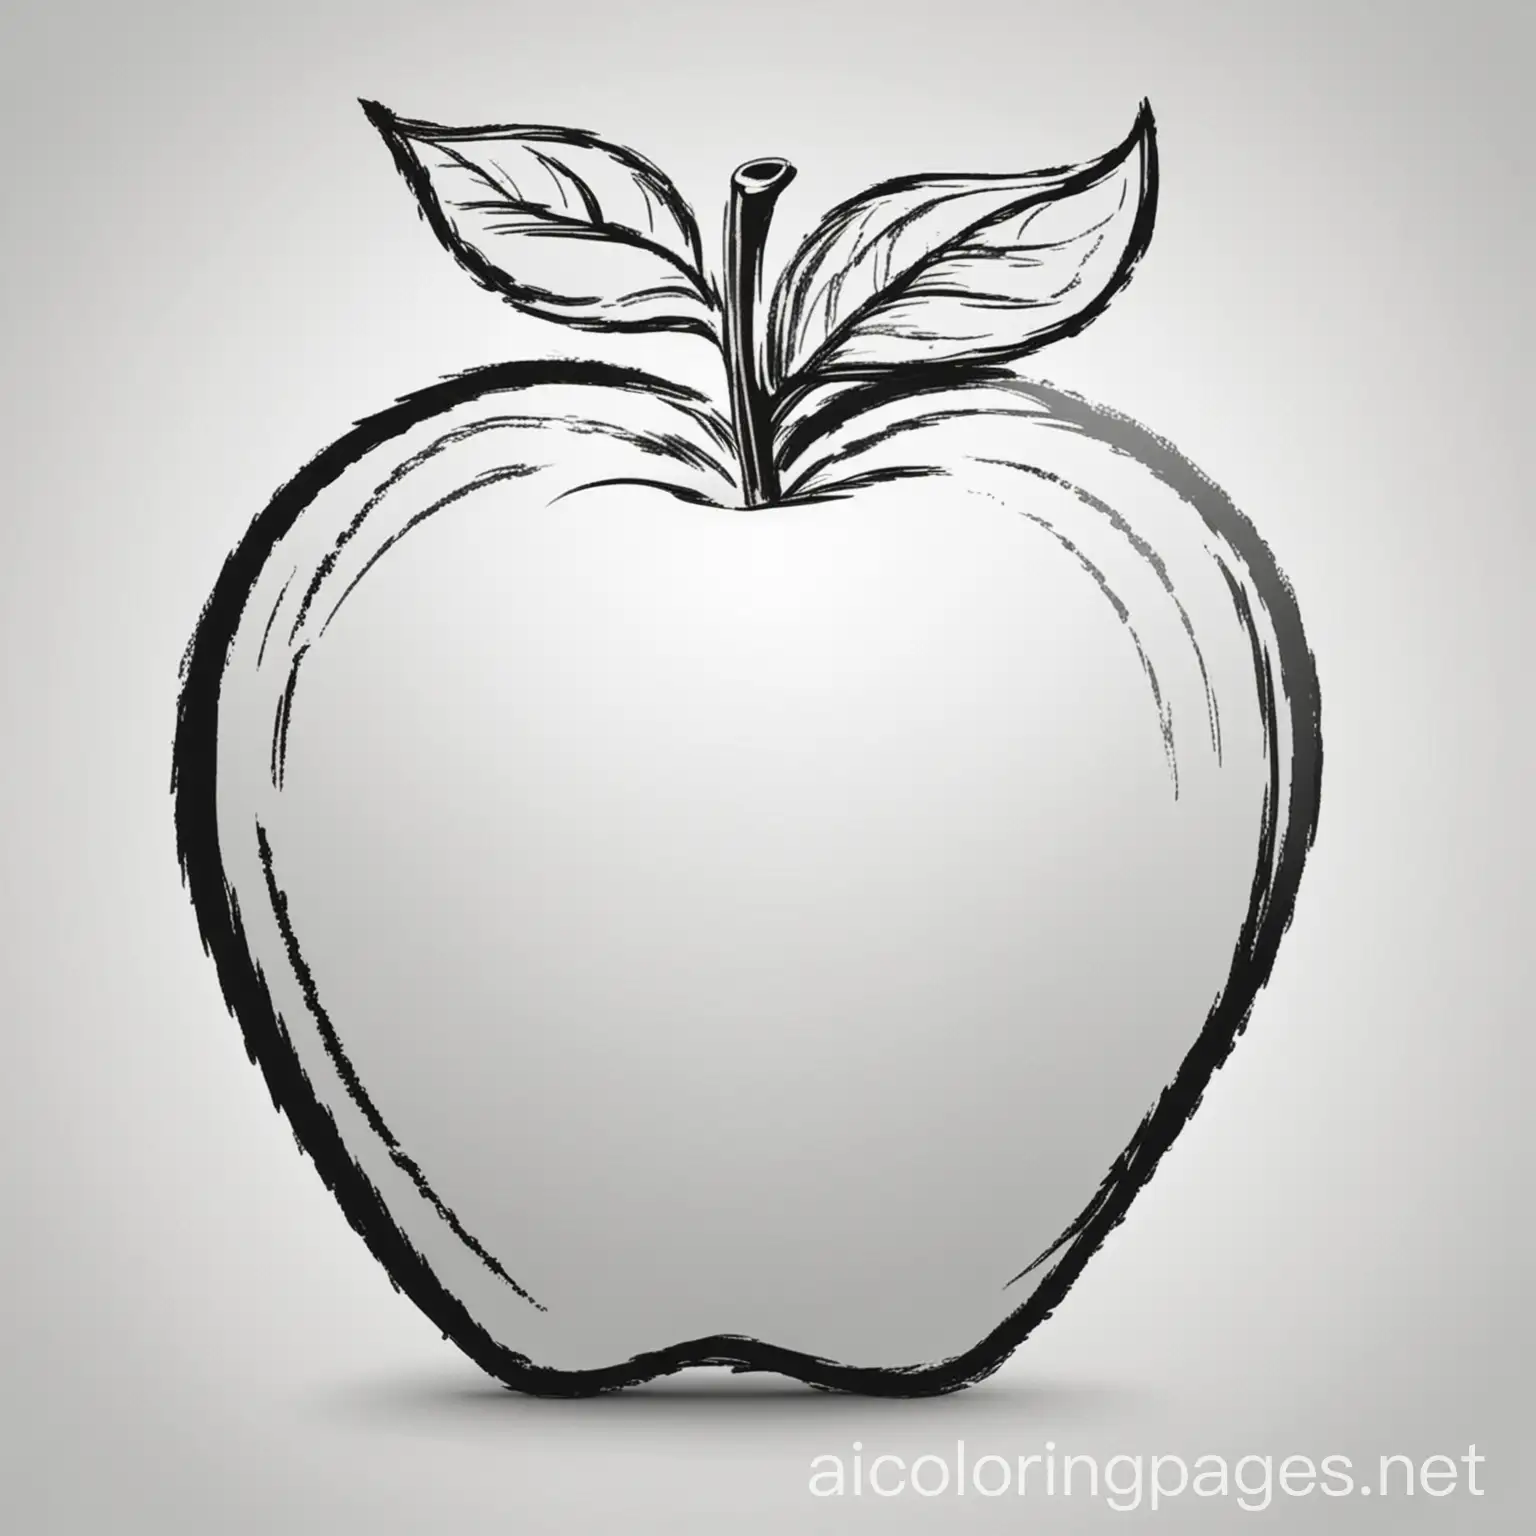 coloring pages for children of an apple, Coloring Page, black and white, line art, white background, Simplicity, Ample White Space. The background of the coloring page is plain white to make it easy for young children to color within the lines. The outlines of all the subjects are easy to distinguish, making it simple for kids to color without too much difficulty